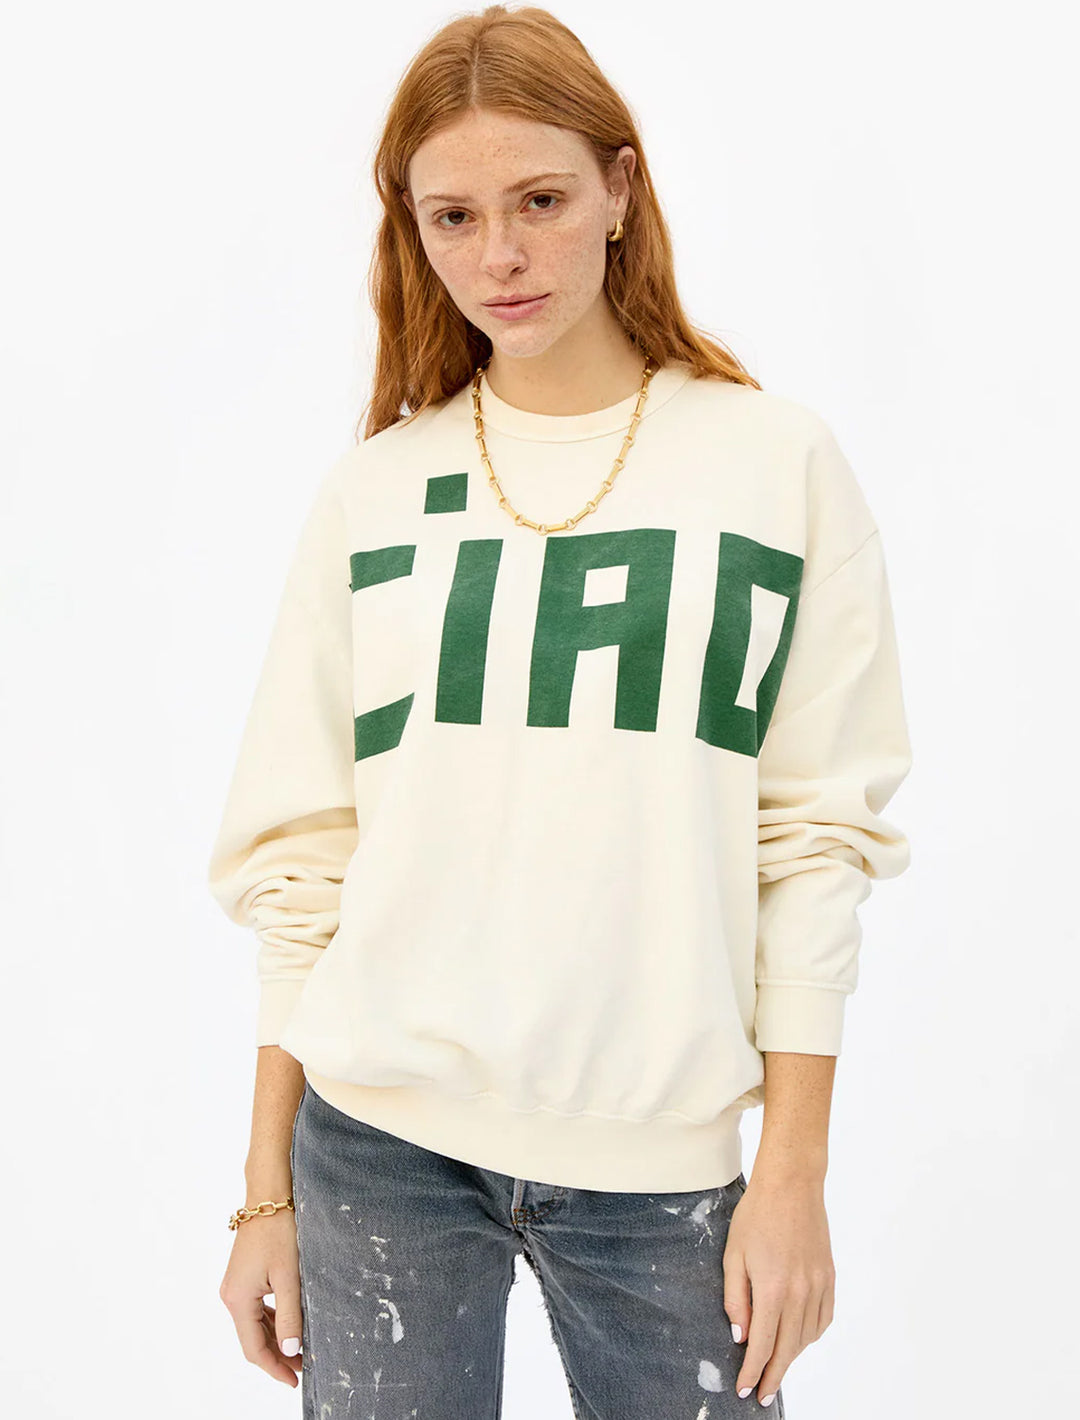 Model wearing Clare V.'s ciao oversized sweatshirt in cream and evergreen.